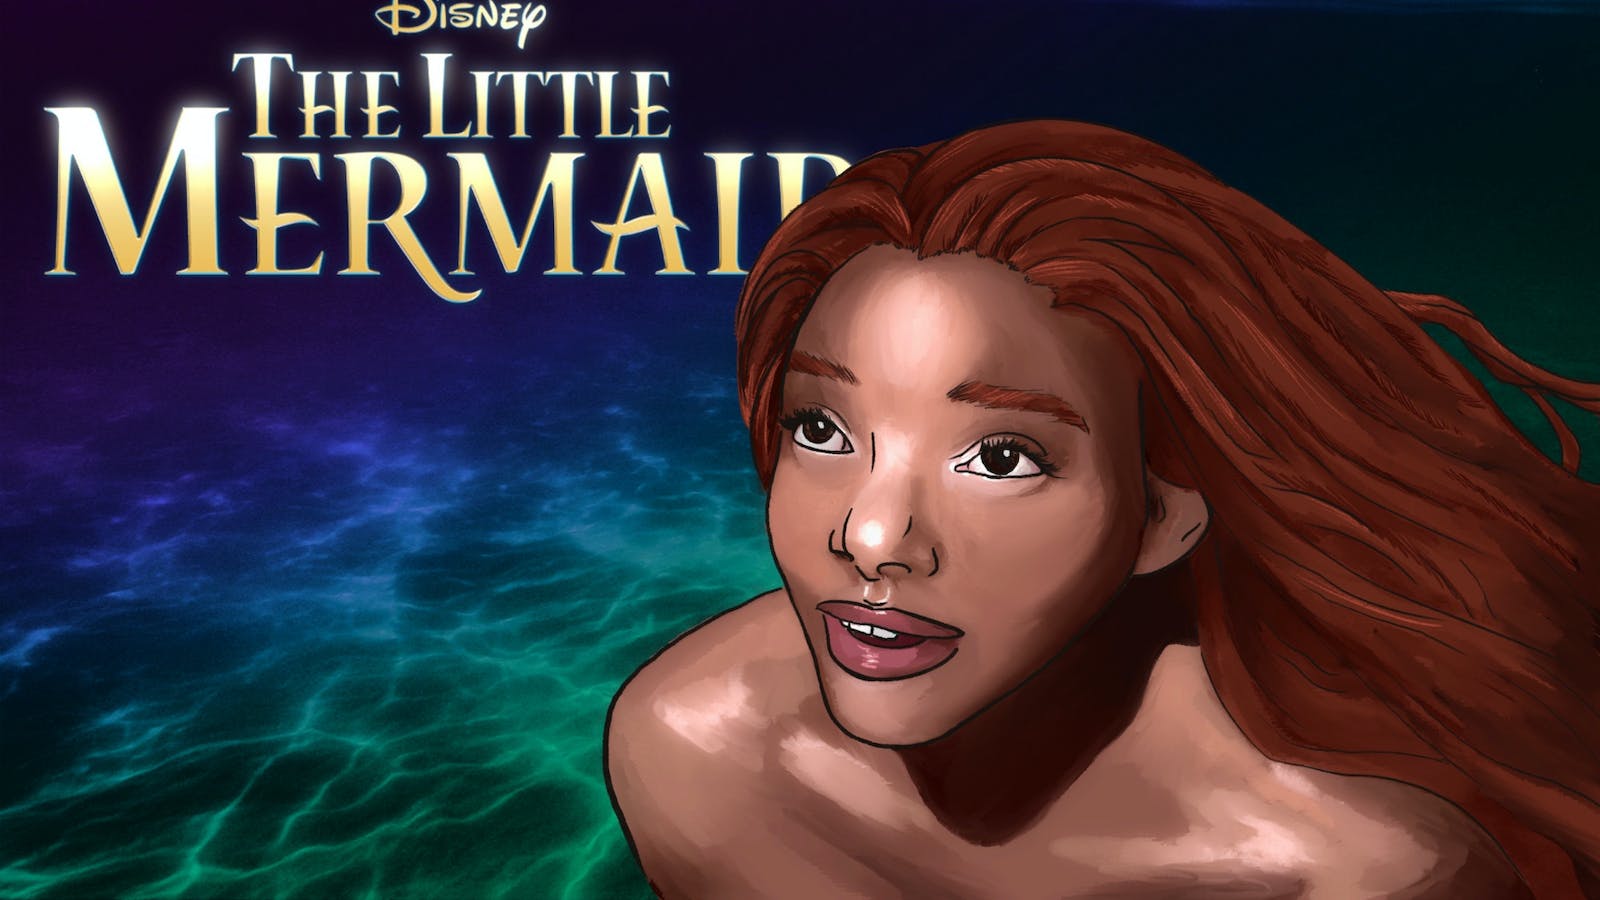 We can be anybody': Little Mermaid revival sparks conversation on representation State News